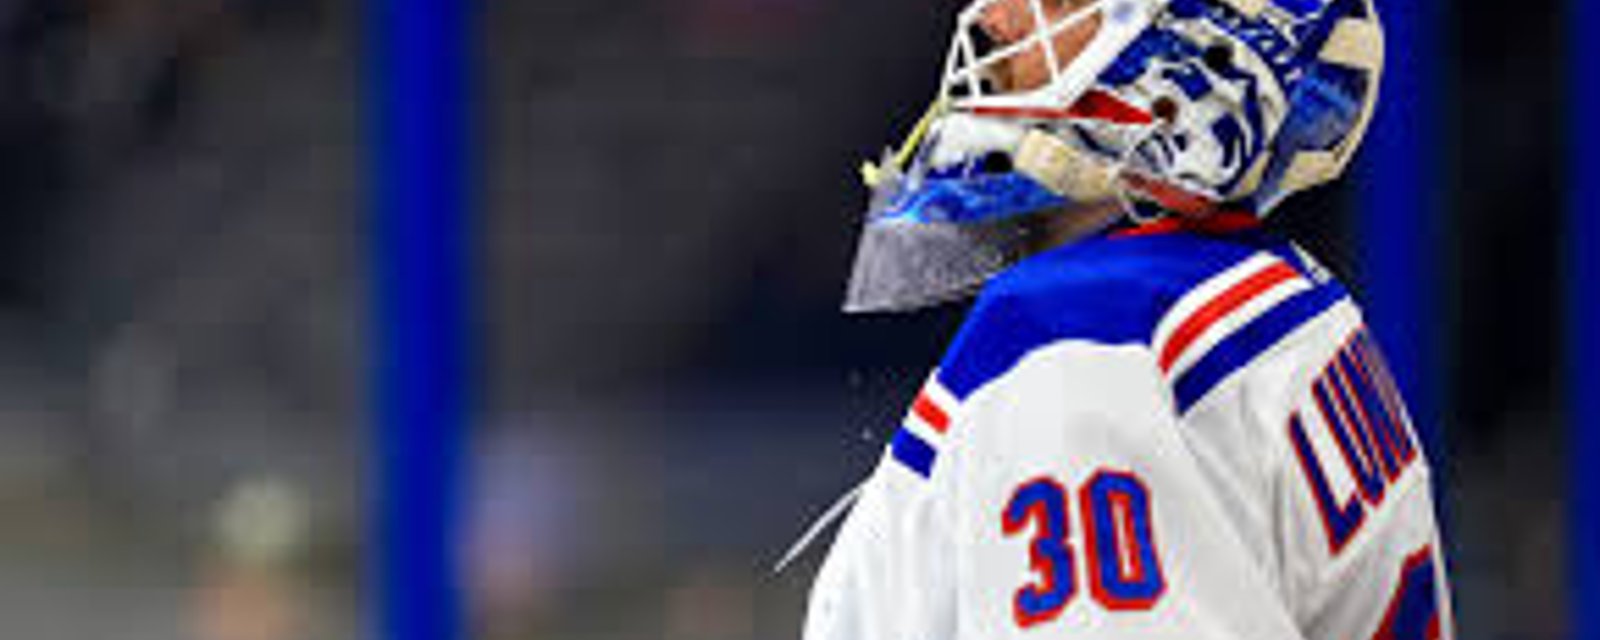 Report: Lundqvist is done with the Rangers